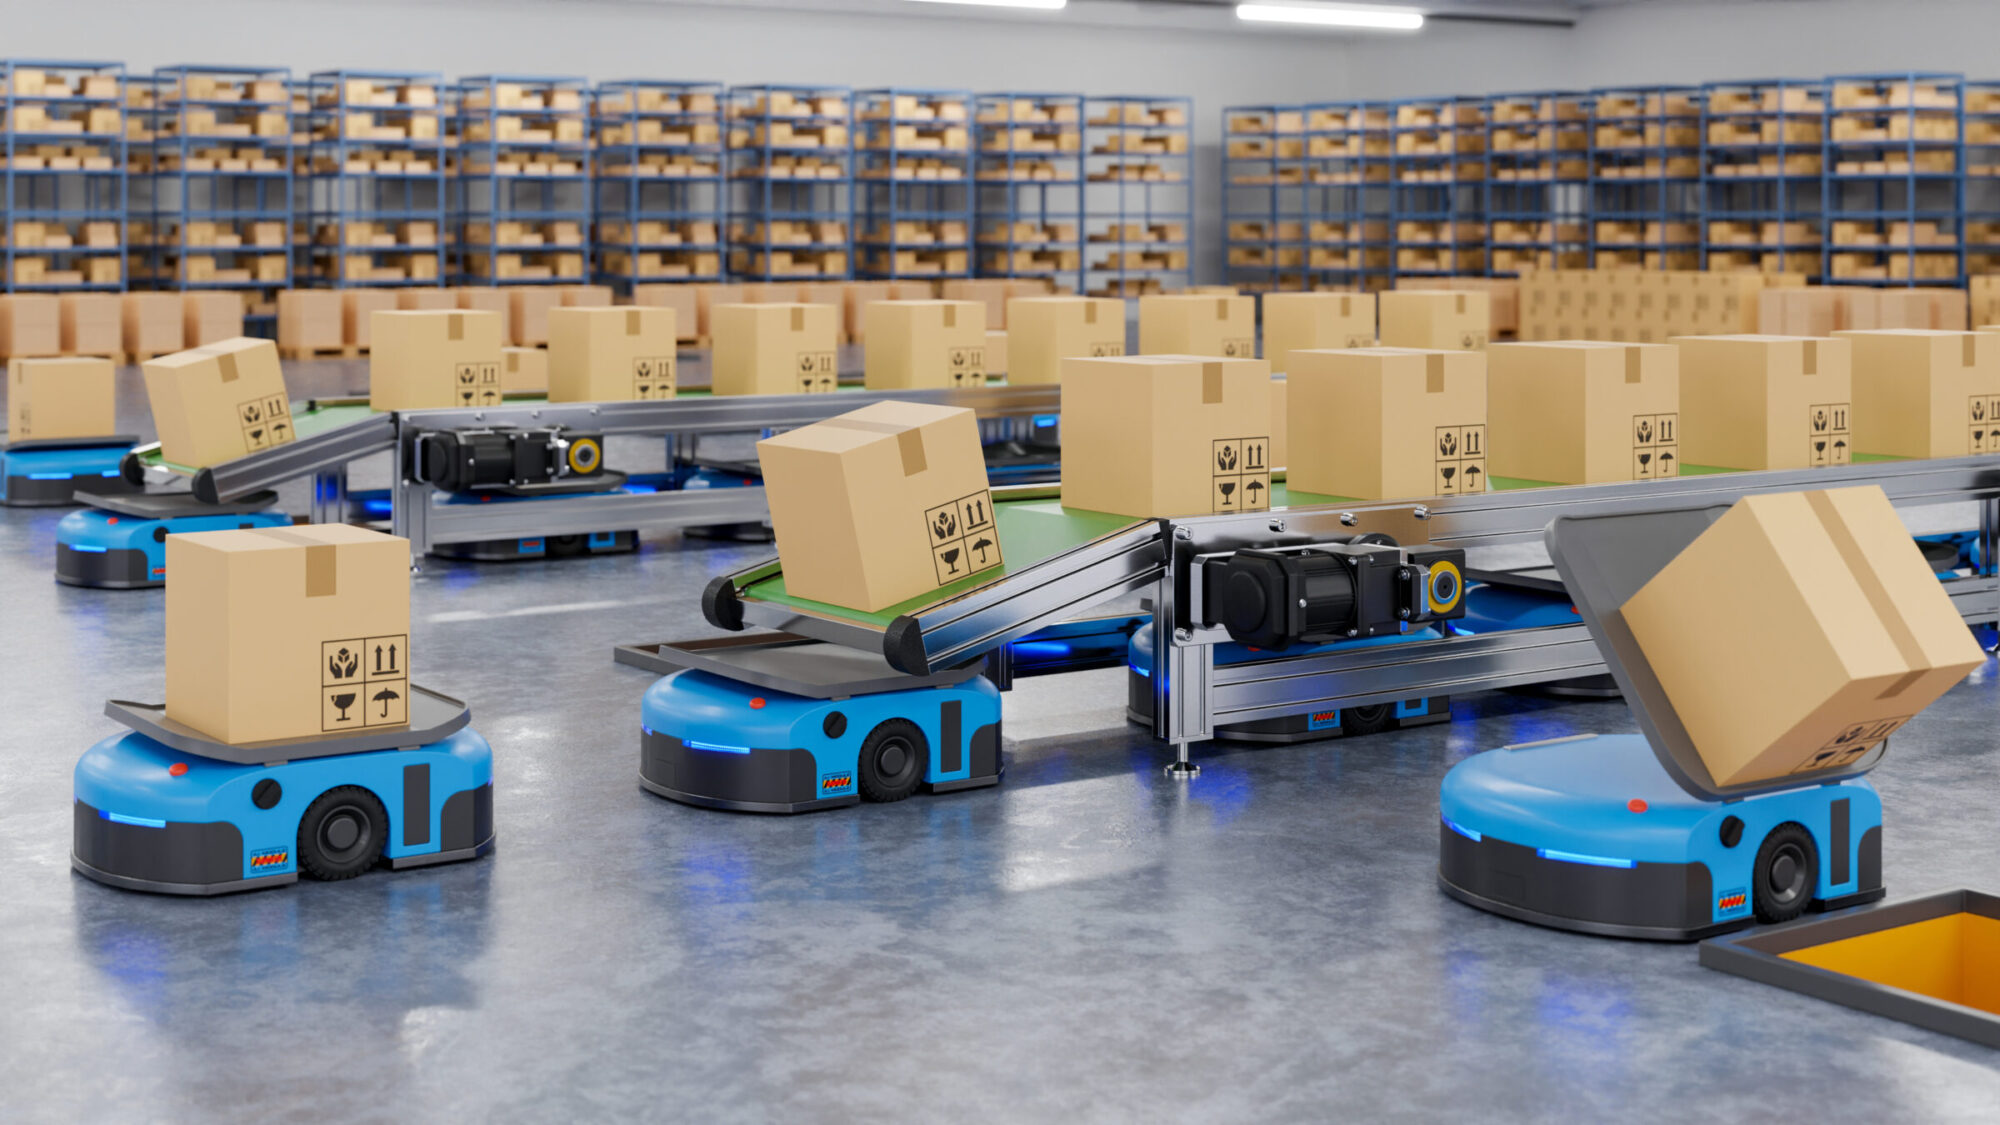 Robots efficiently sorting hundreds of parcels per hour in a warehouse